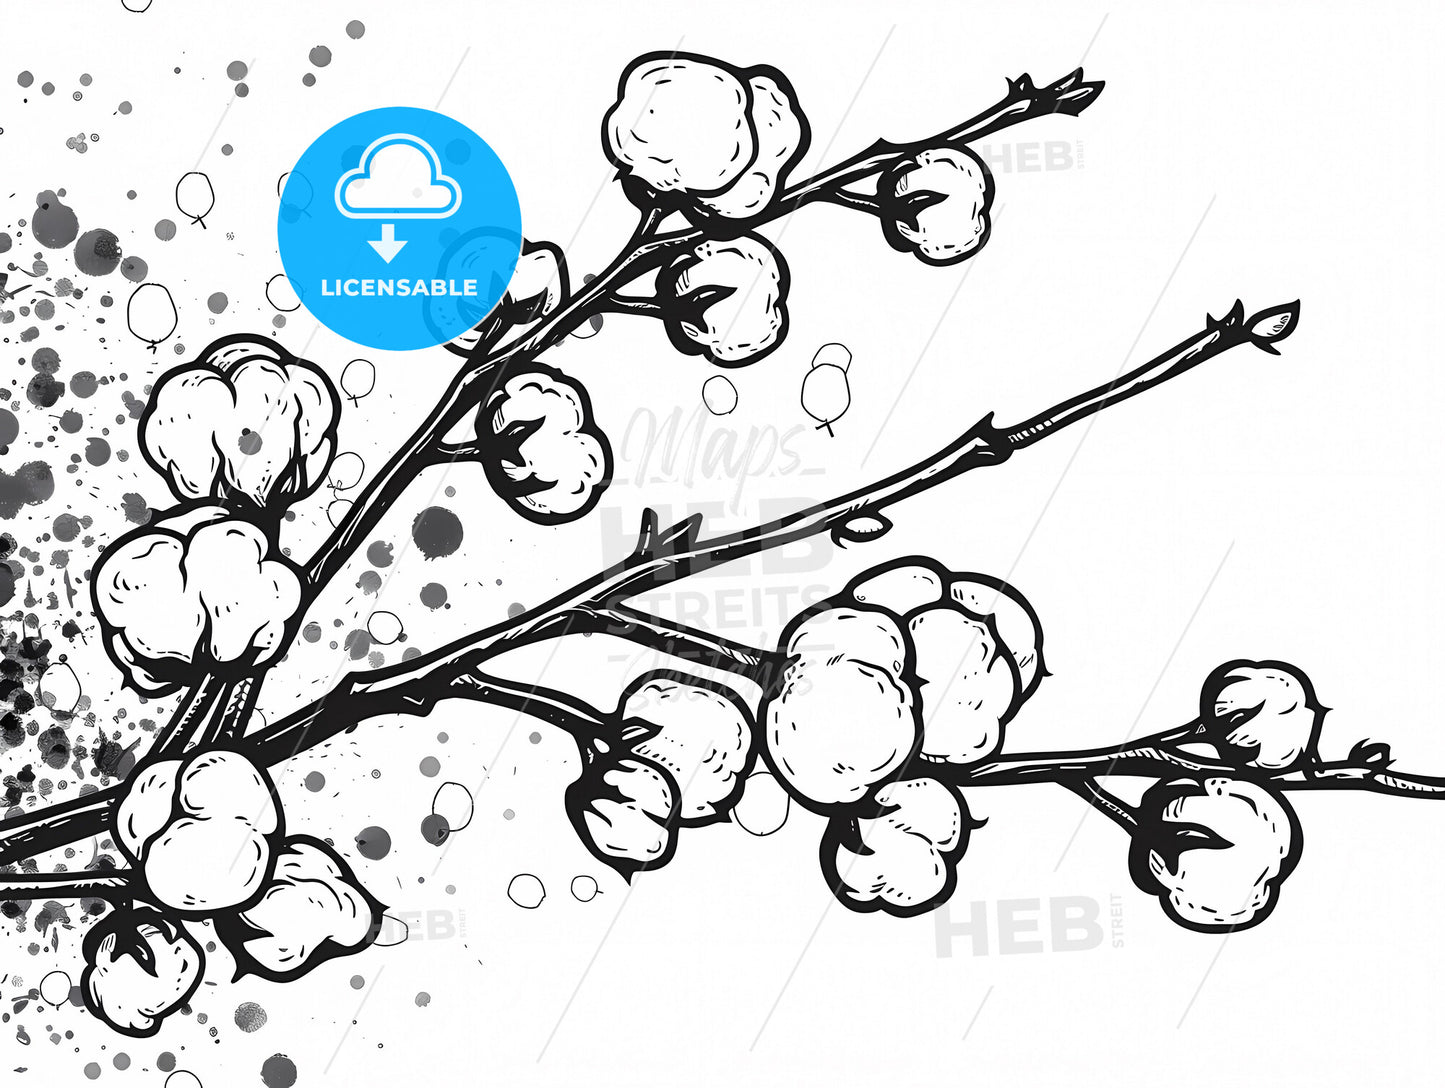 Black and white artistic depiction of cotton flower